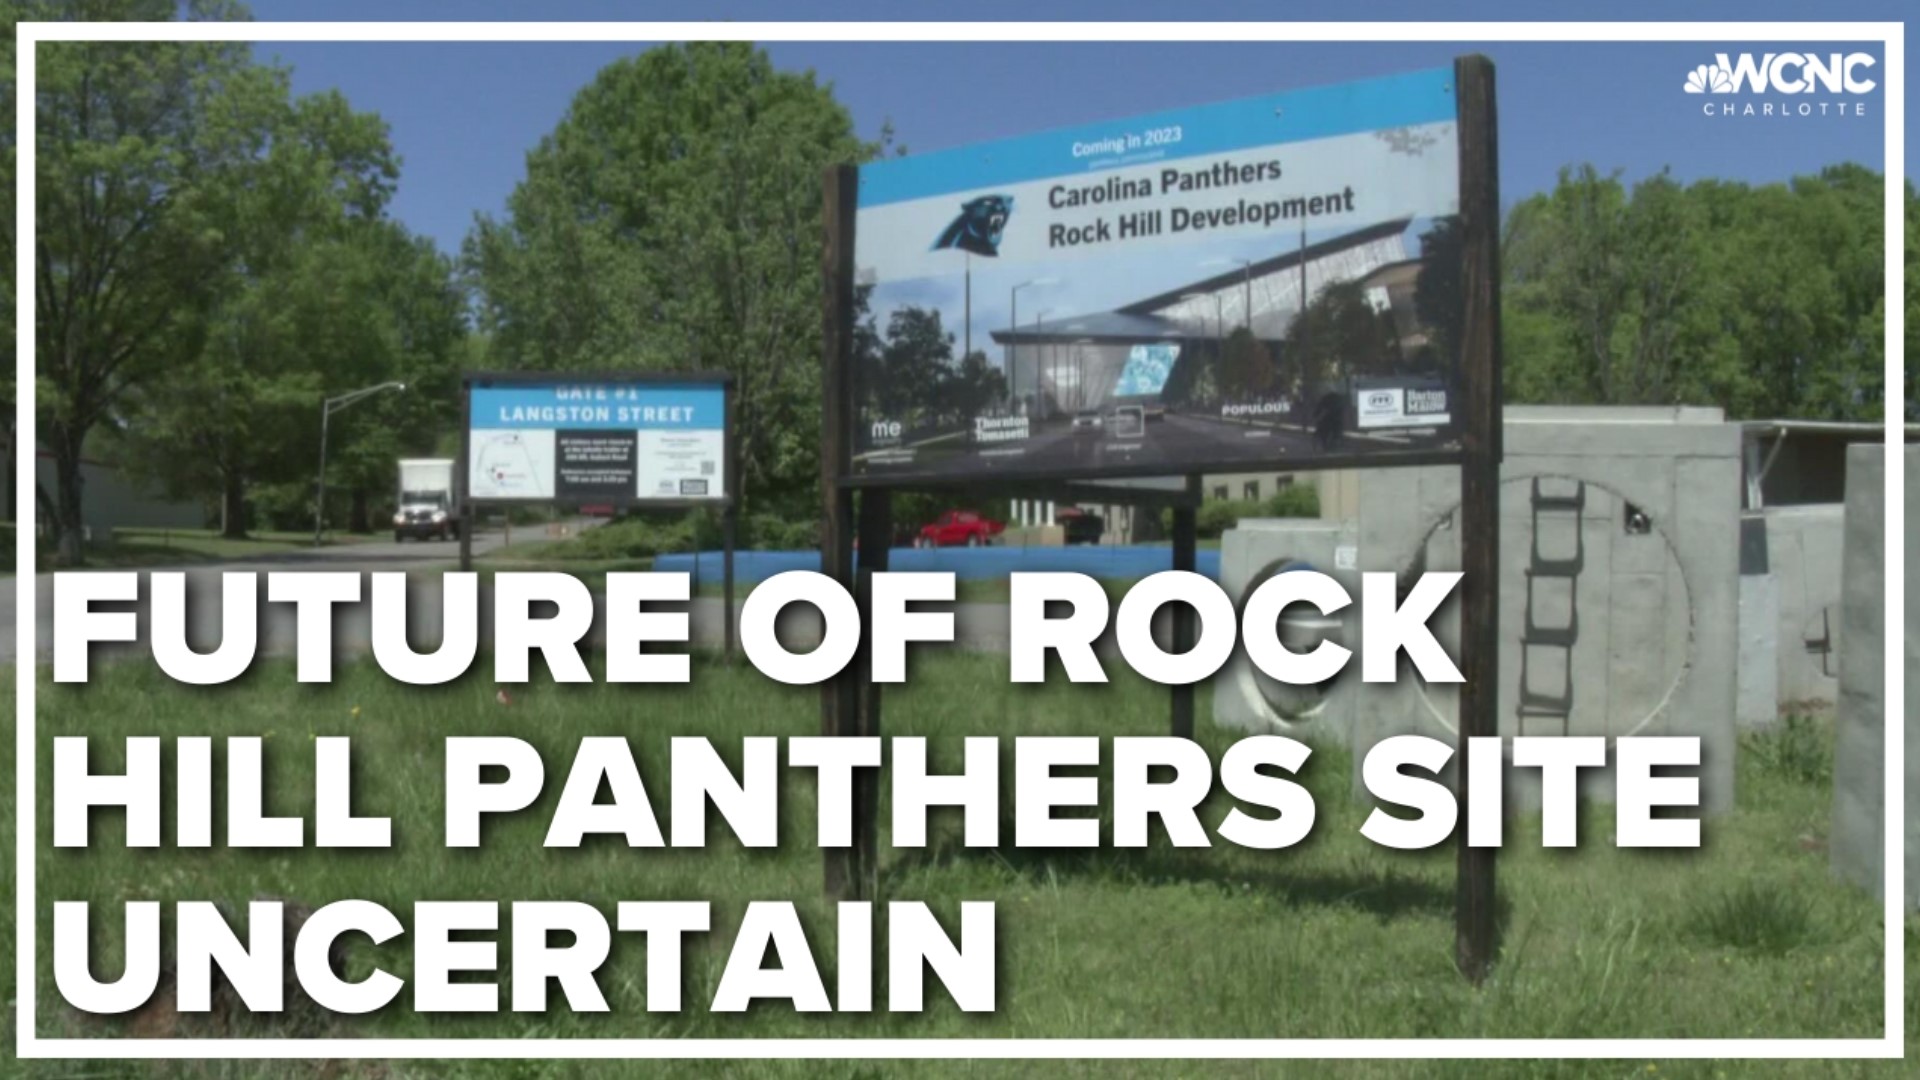 Hopes the Panthers would get a new training facility in Rock Hill were dashed earlier this year when owner David Tepper terminated the project.